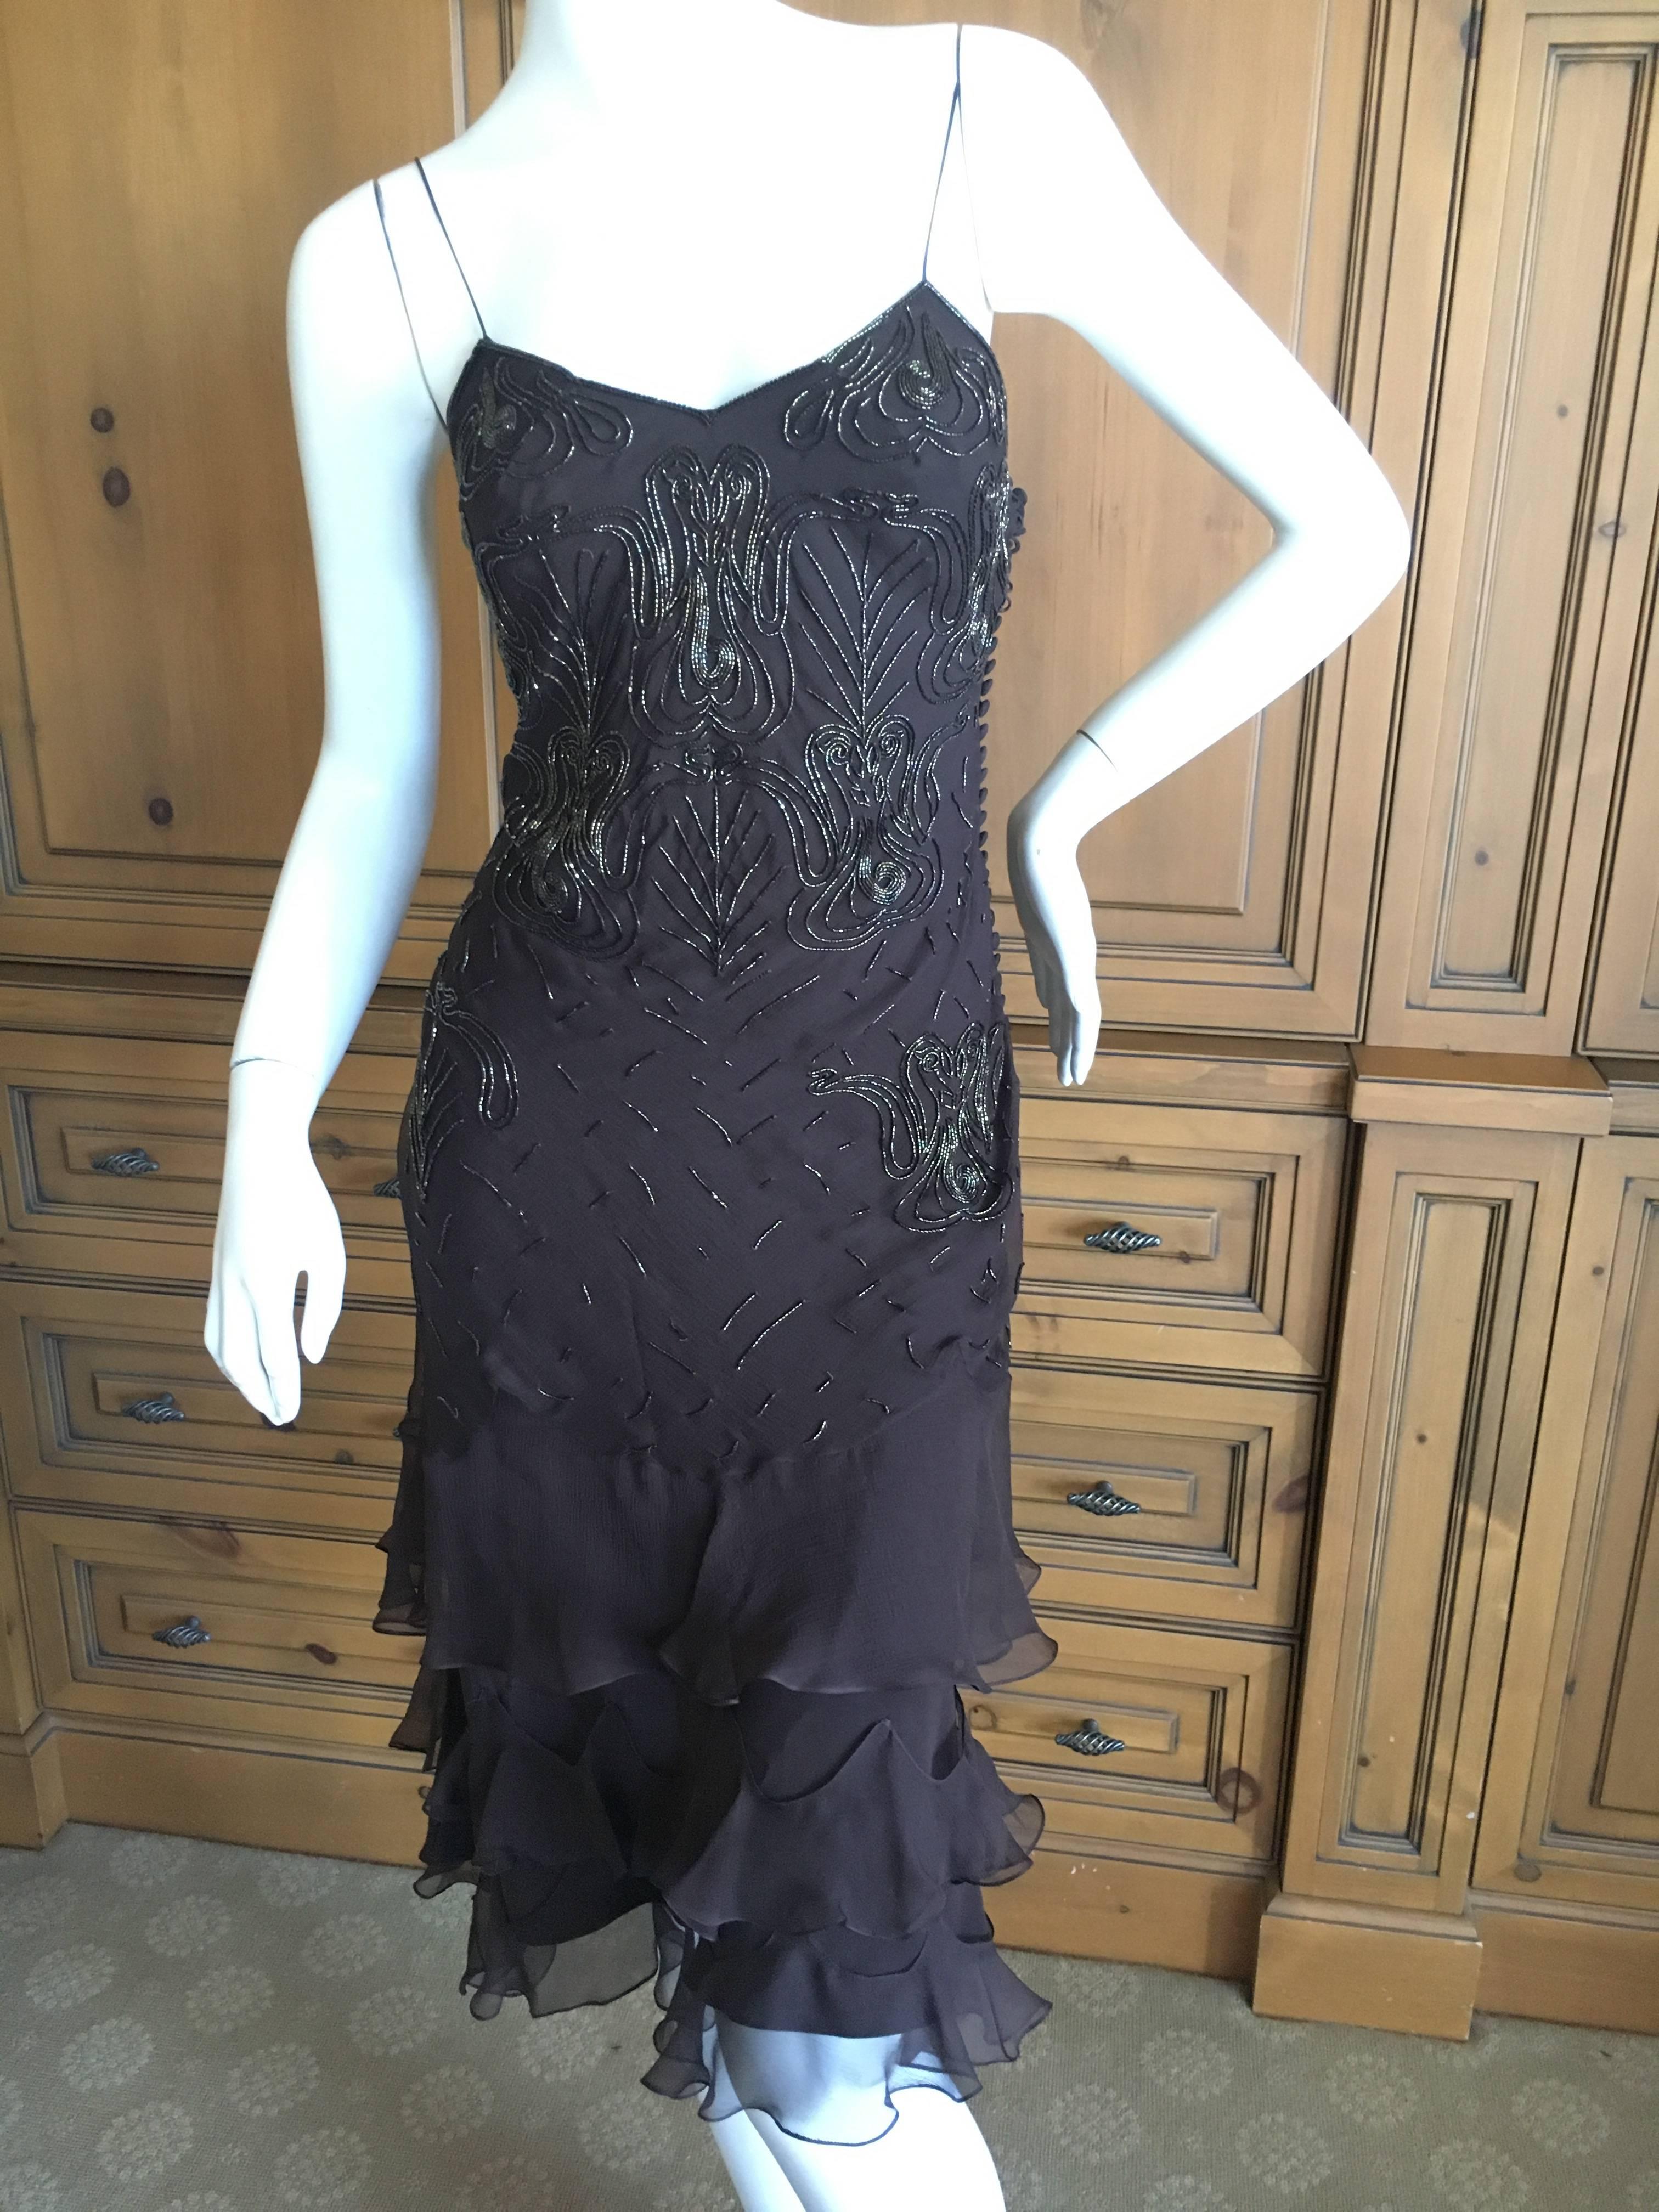 Christian Dior Bead Embellished Silk Chiffon Cocktail Dress by John Galliano  For Sale 1